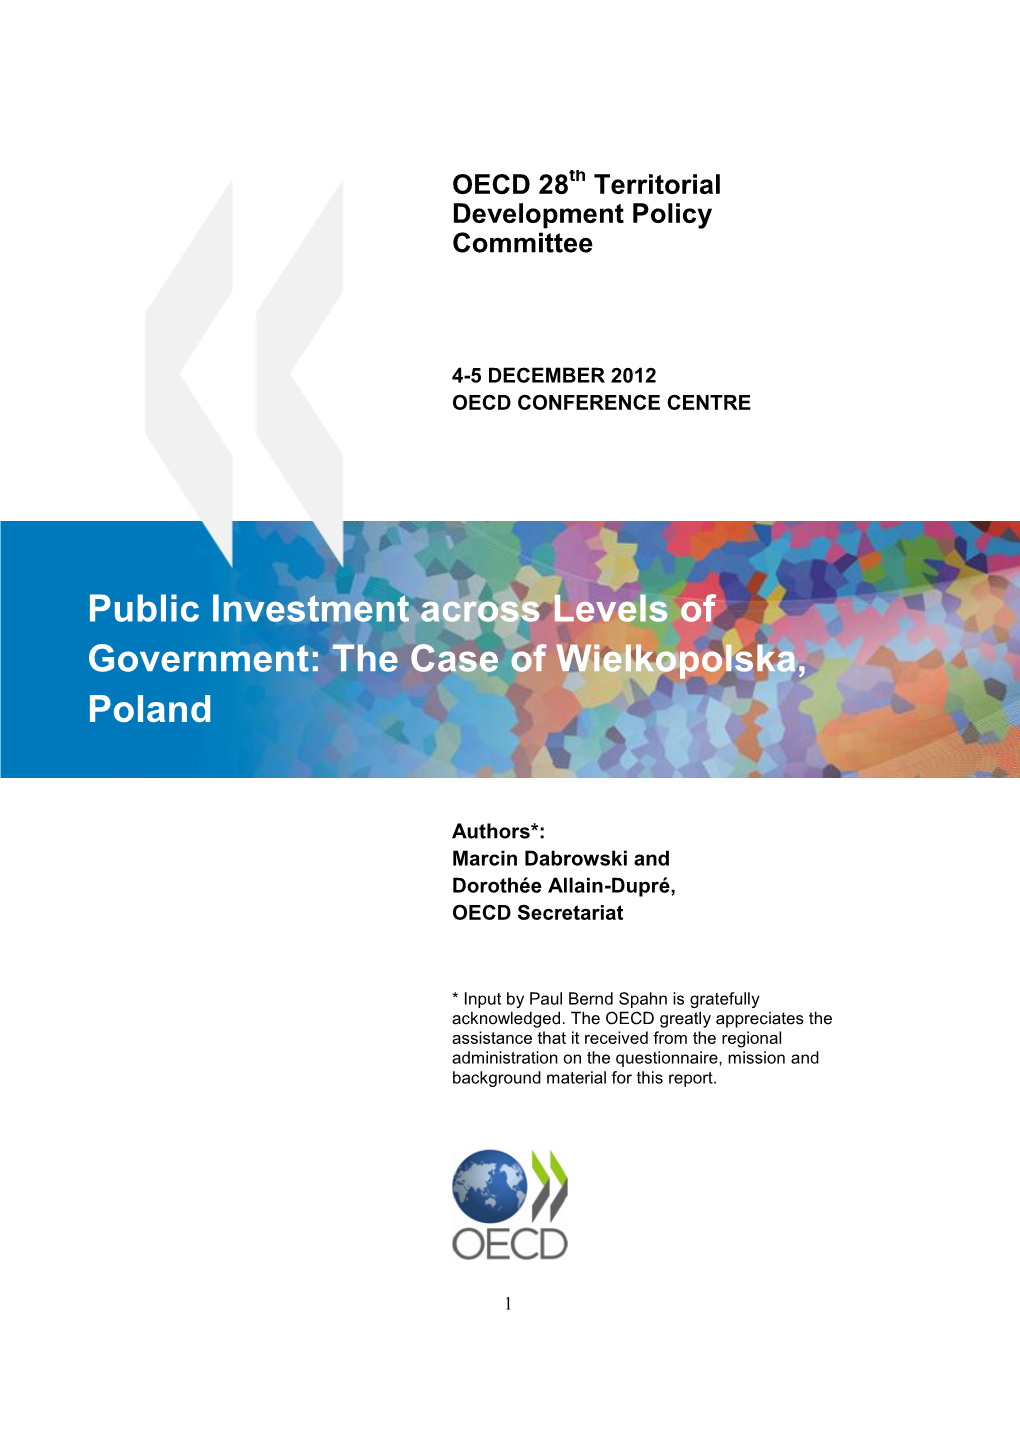 Public Investment Across Levels of Government: the Case of Wielkopolska, Poland